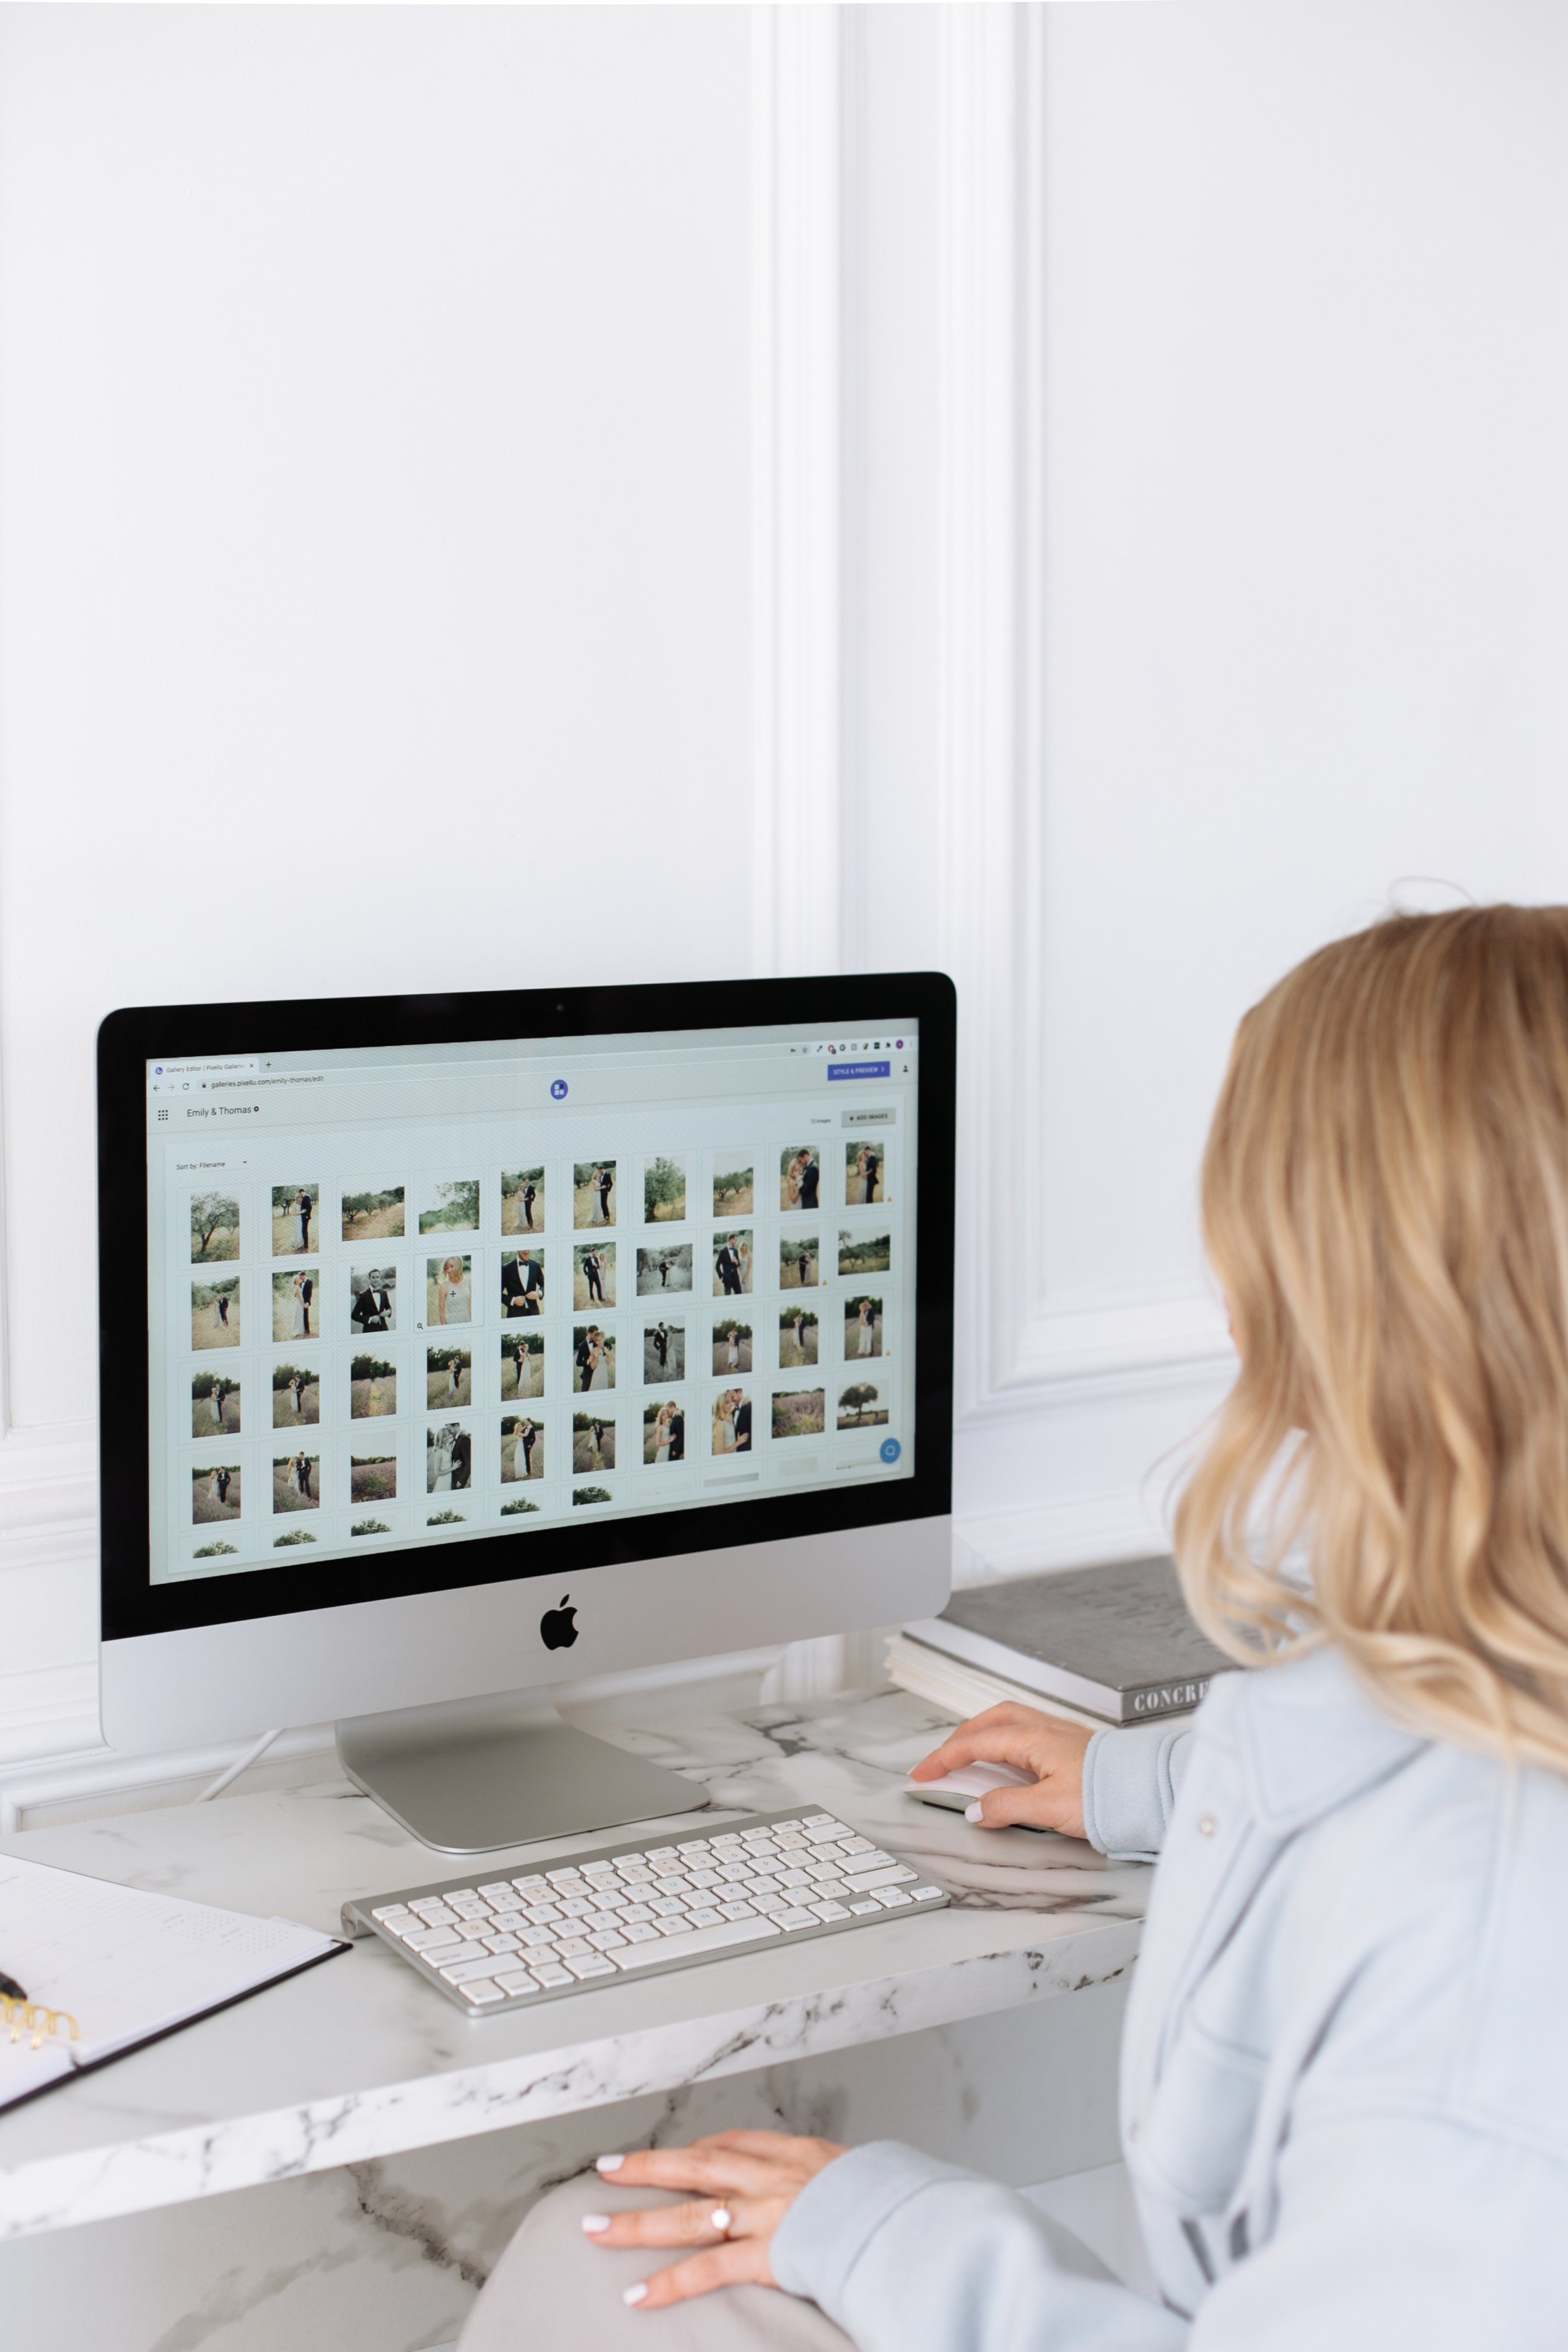 An over-the-head shot of a women looking at the screen of a iMac while scrolling 